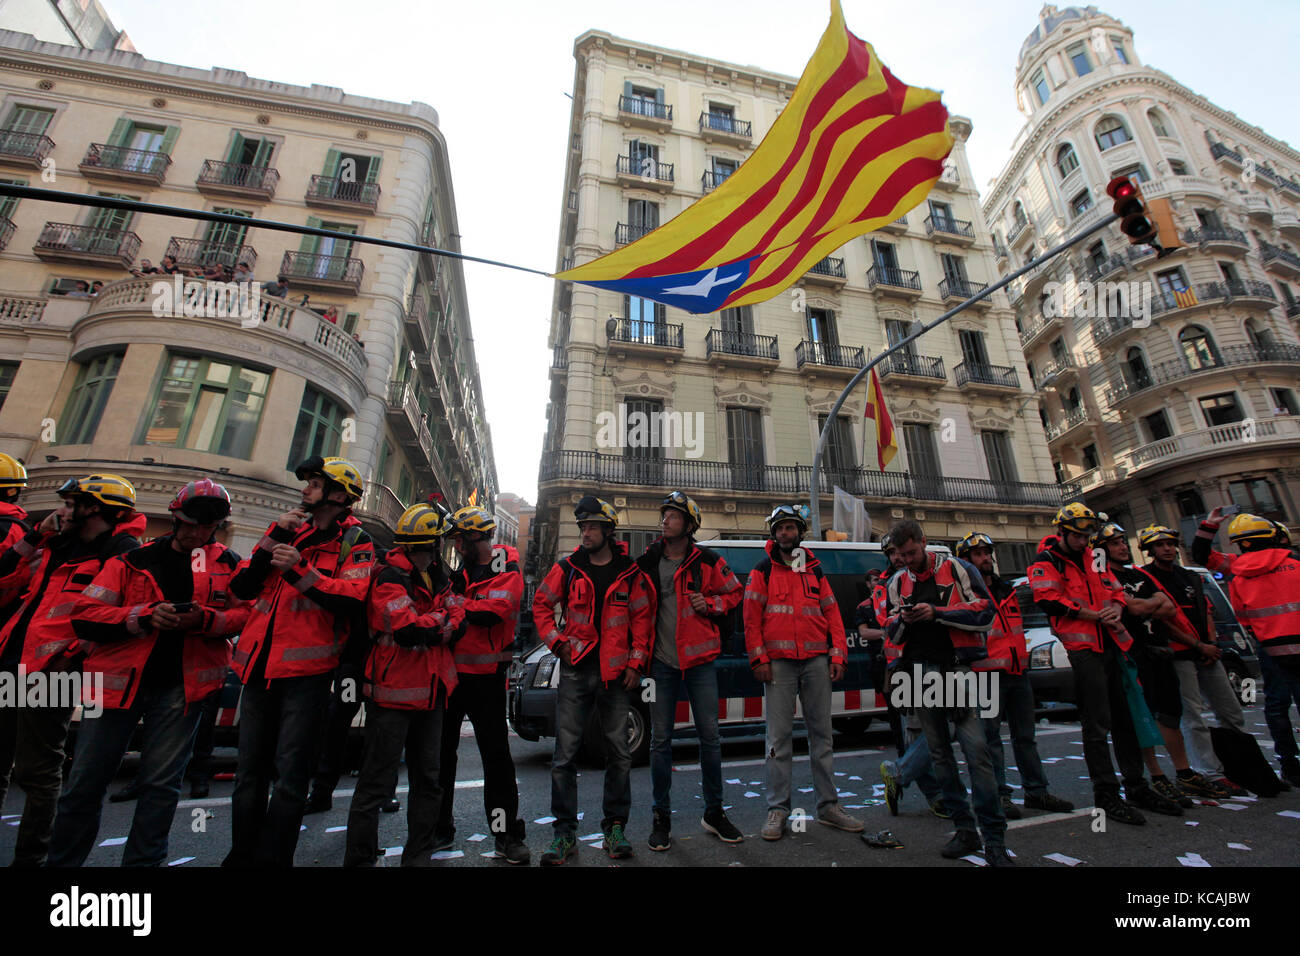 Barcelona, Spain. 03rd Oct, 2017.  Firemen from barcelona create a codon outside the nacional police headquarters on via alienate, BCN. Images from Barcelona during A General Strike held all over the Spanish state of Catalonia today (3/10/2017), following the unofficial referendum previously held on Sunday 1/10/2017. The Spanish government have deemed the referendum illegal and against the constitution of Spain. Photo credit: RICH BOWEN Credit: rich bowen/Alamy Live News Stock Photo